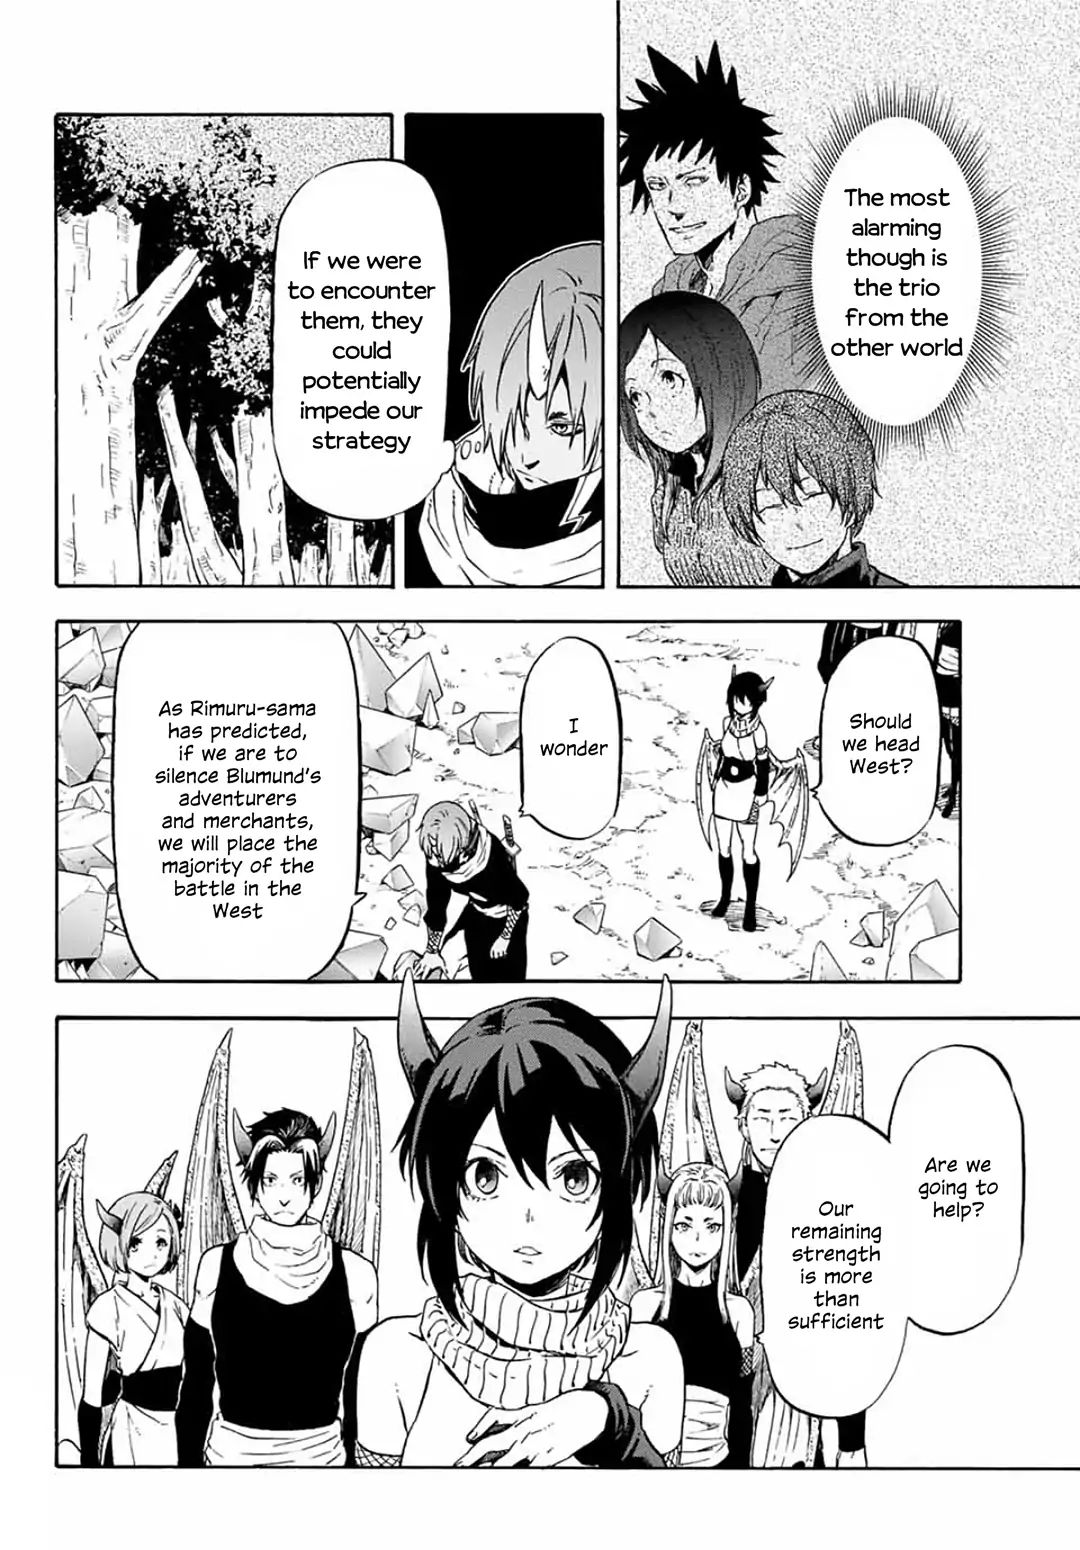 That Time I Got Reincarnated as a Slime, Chapter 64